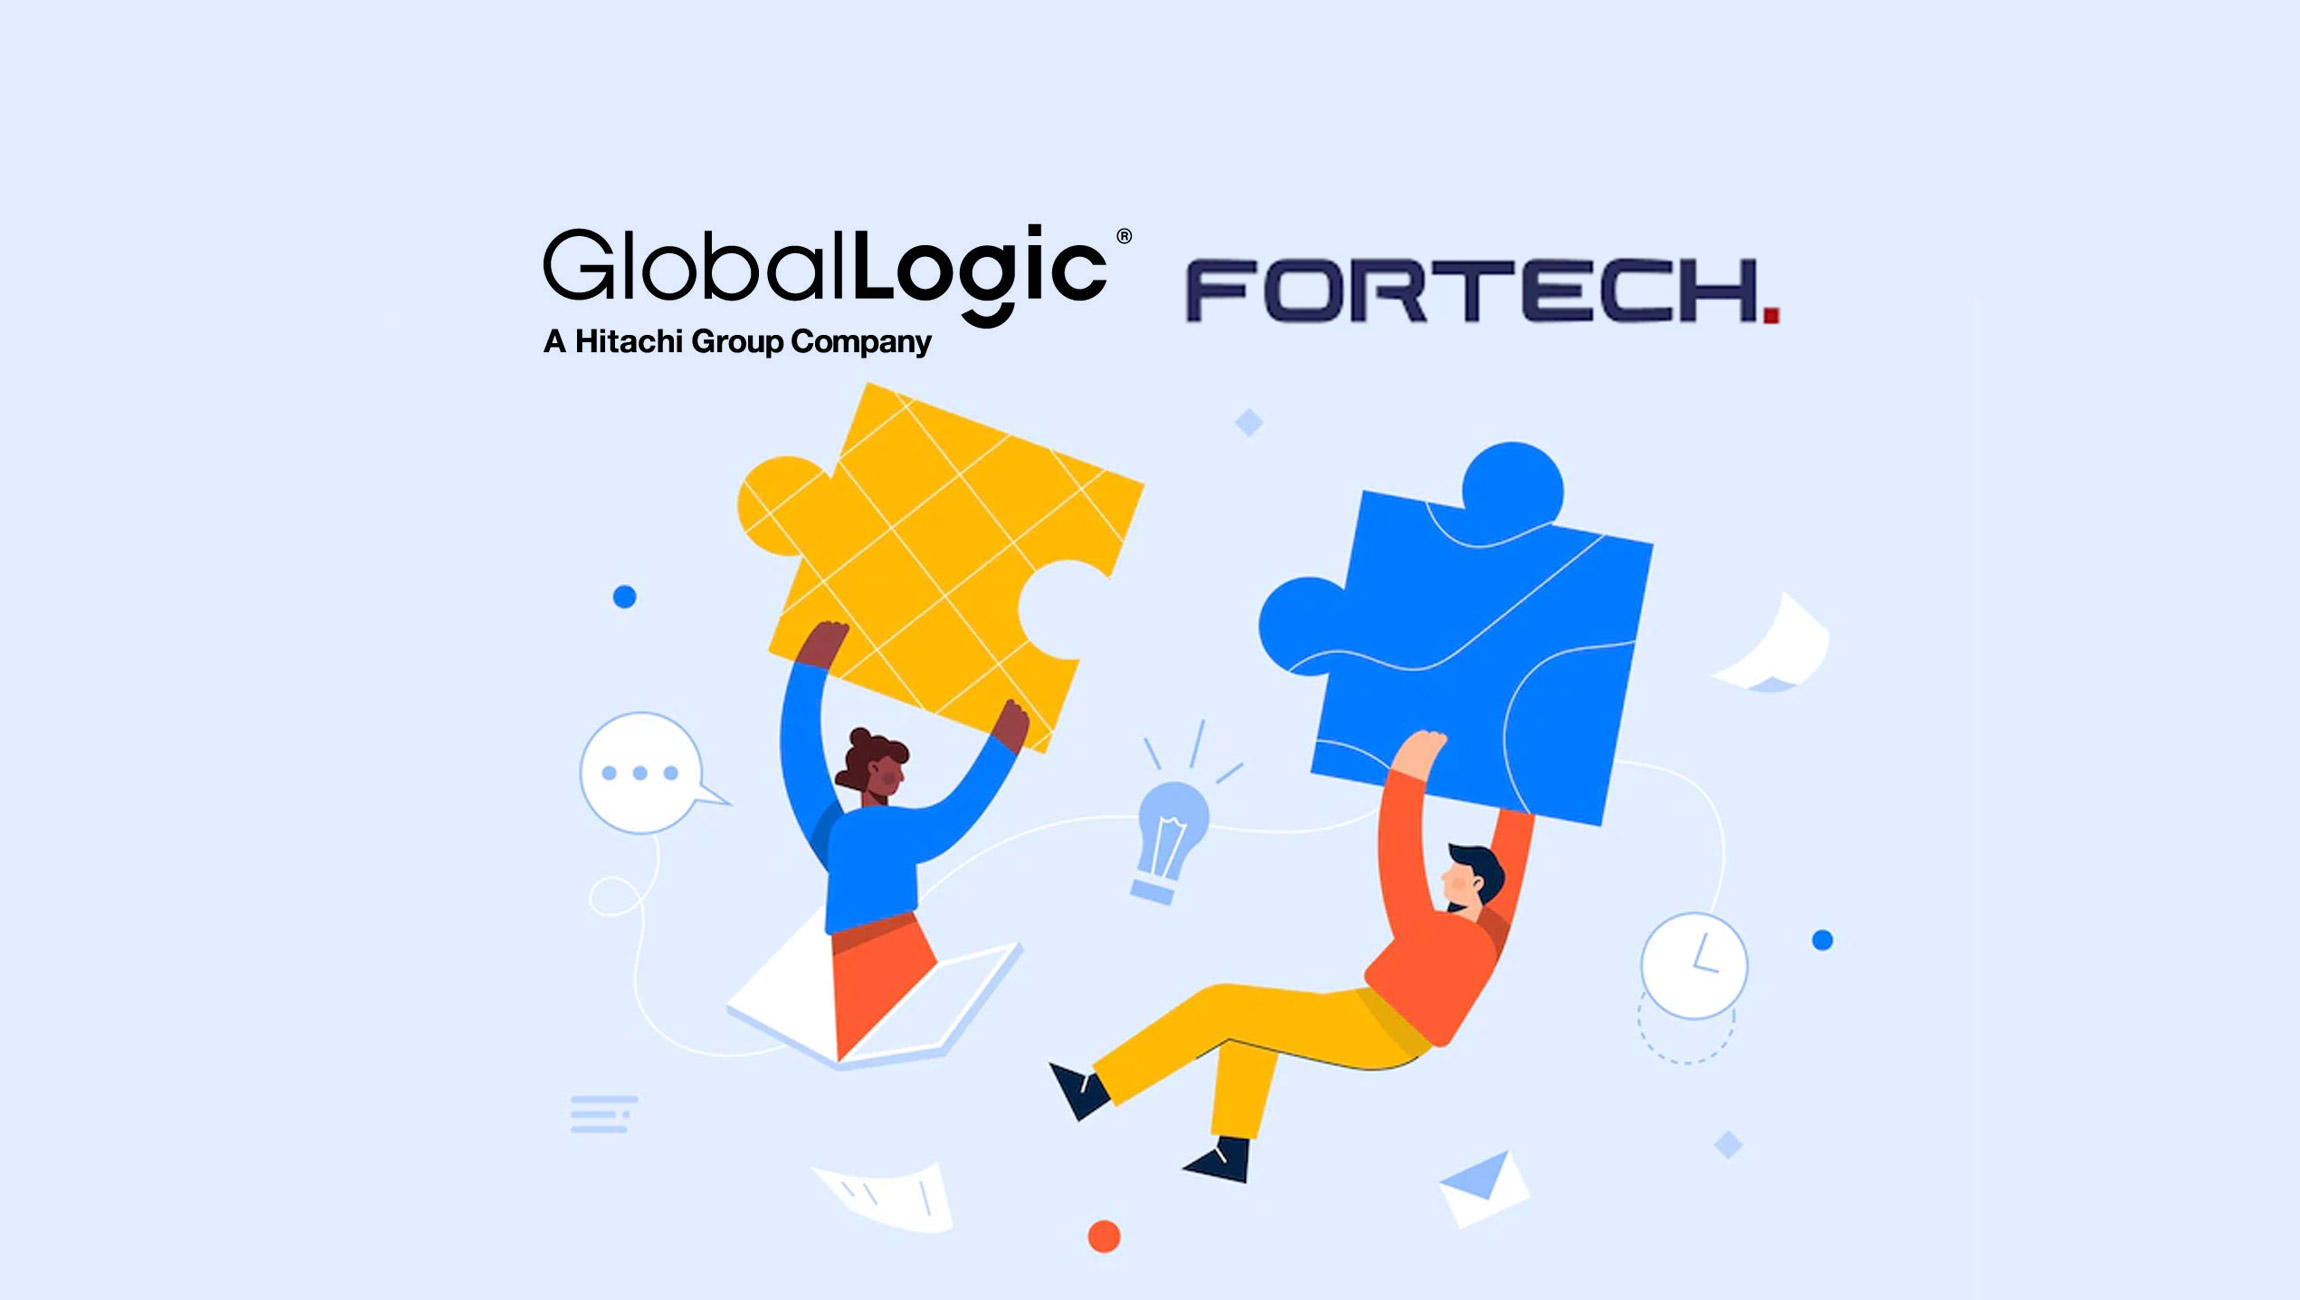 GlobalLogic Acquires Fortech, a Leading Digital Engineering Company Based in Romania